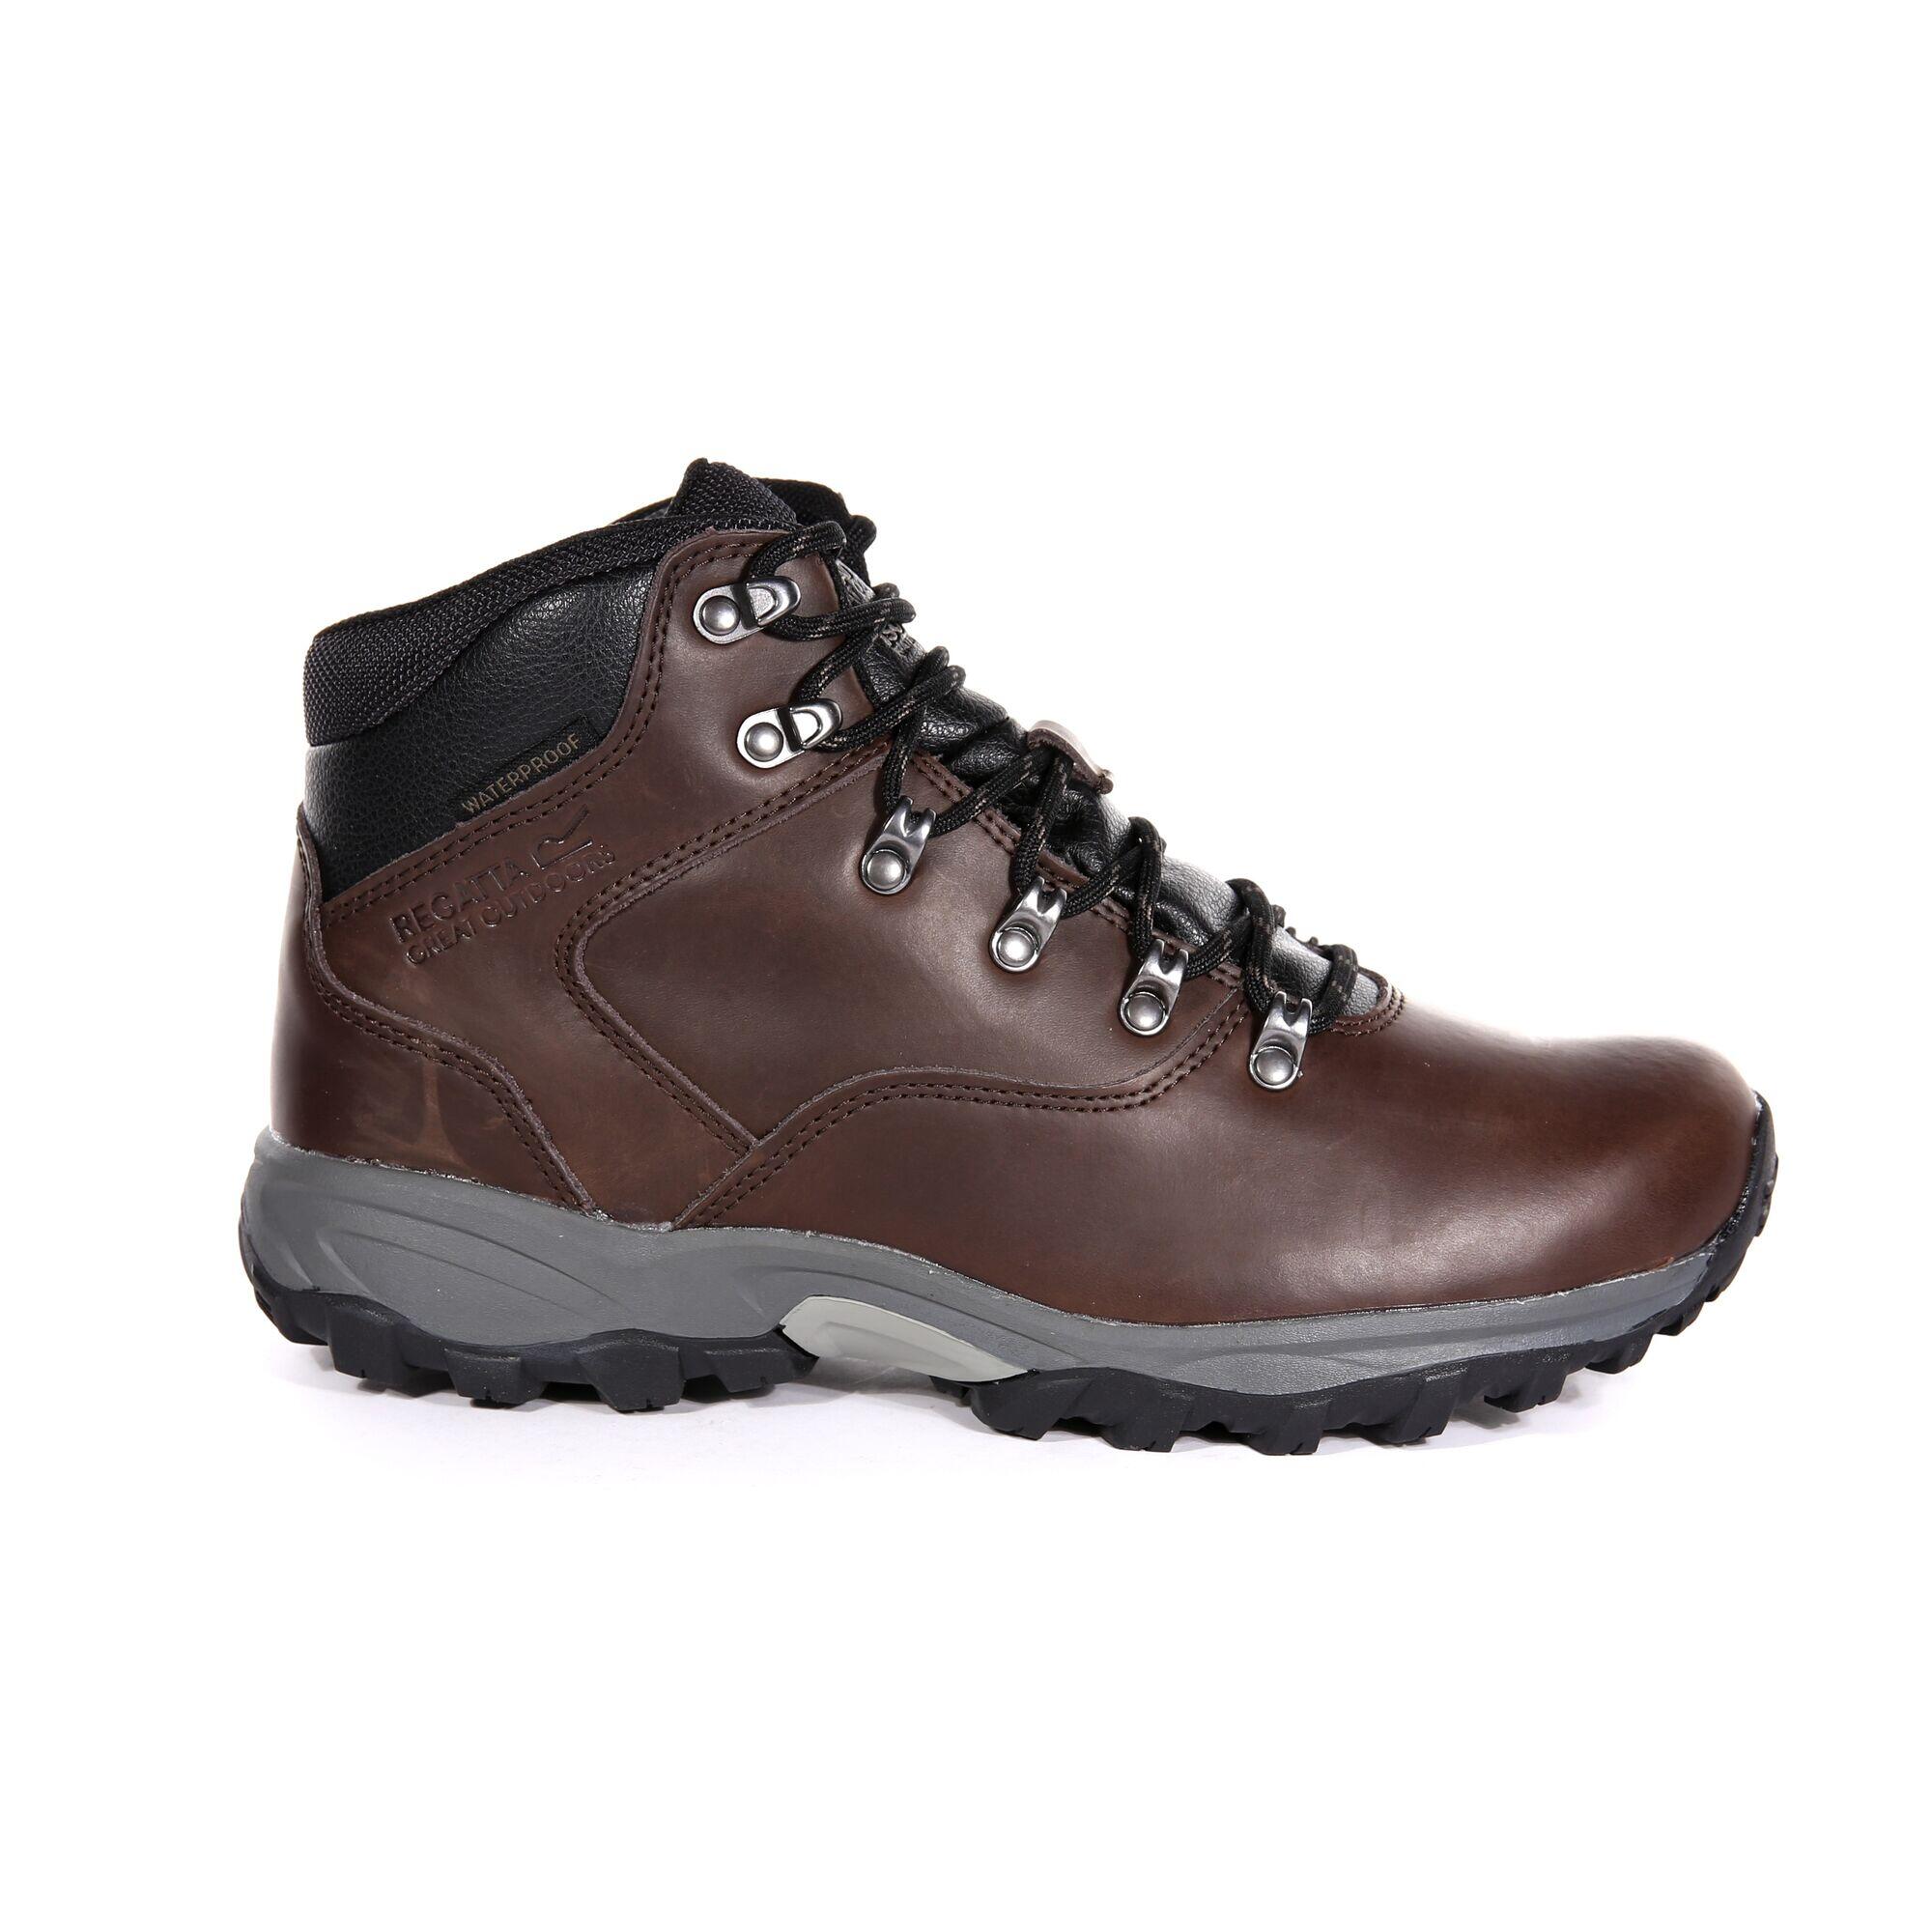 Regatta Great Outdoors Mens Bainsford Waterproof Leather Hiking Boots (peat)